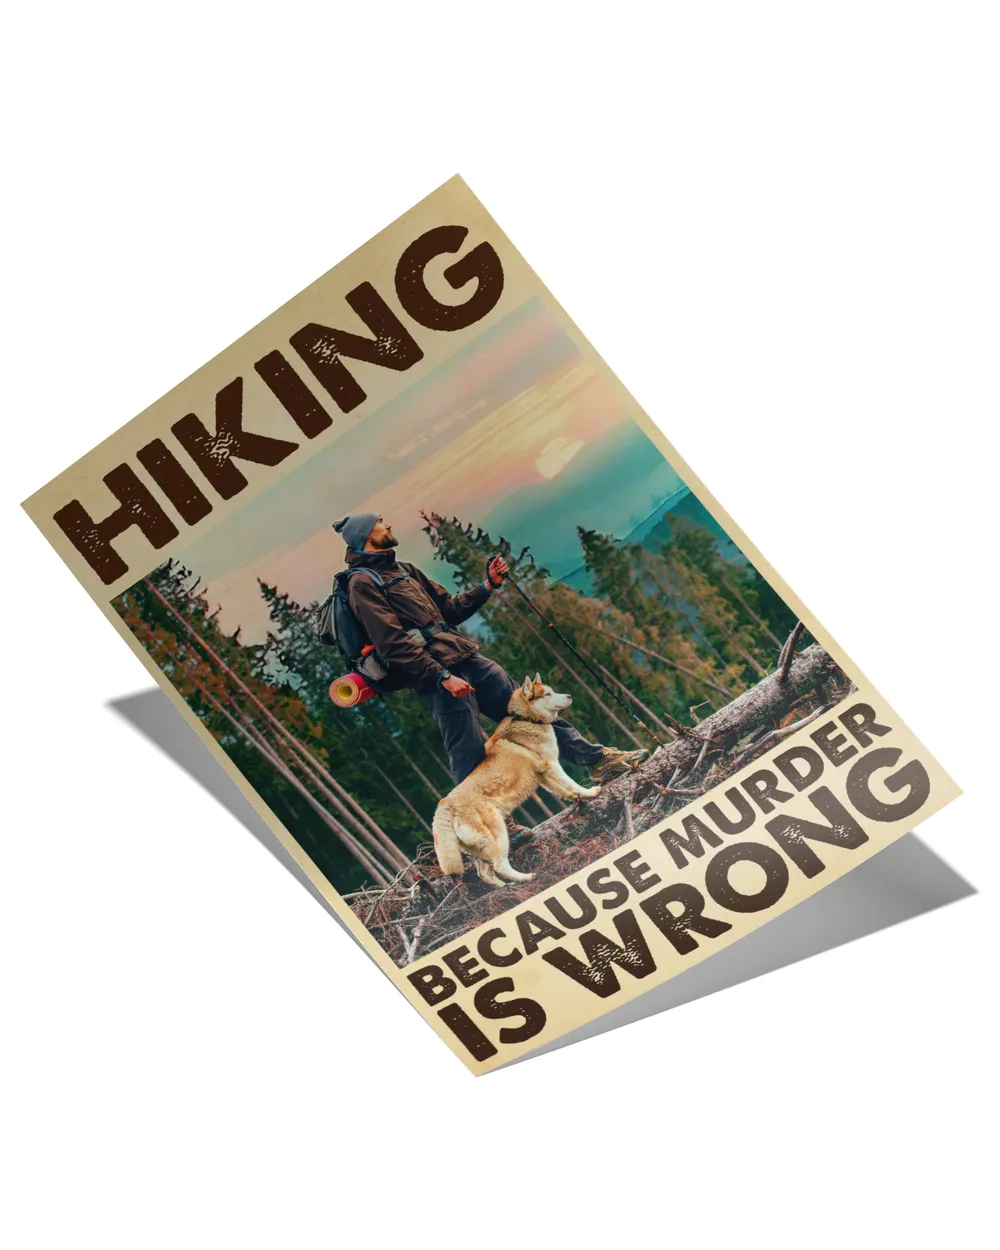 Hiking with Because Murder is Wrong Poster Poster